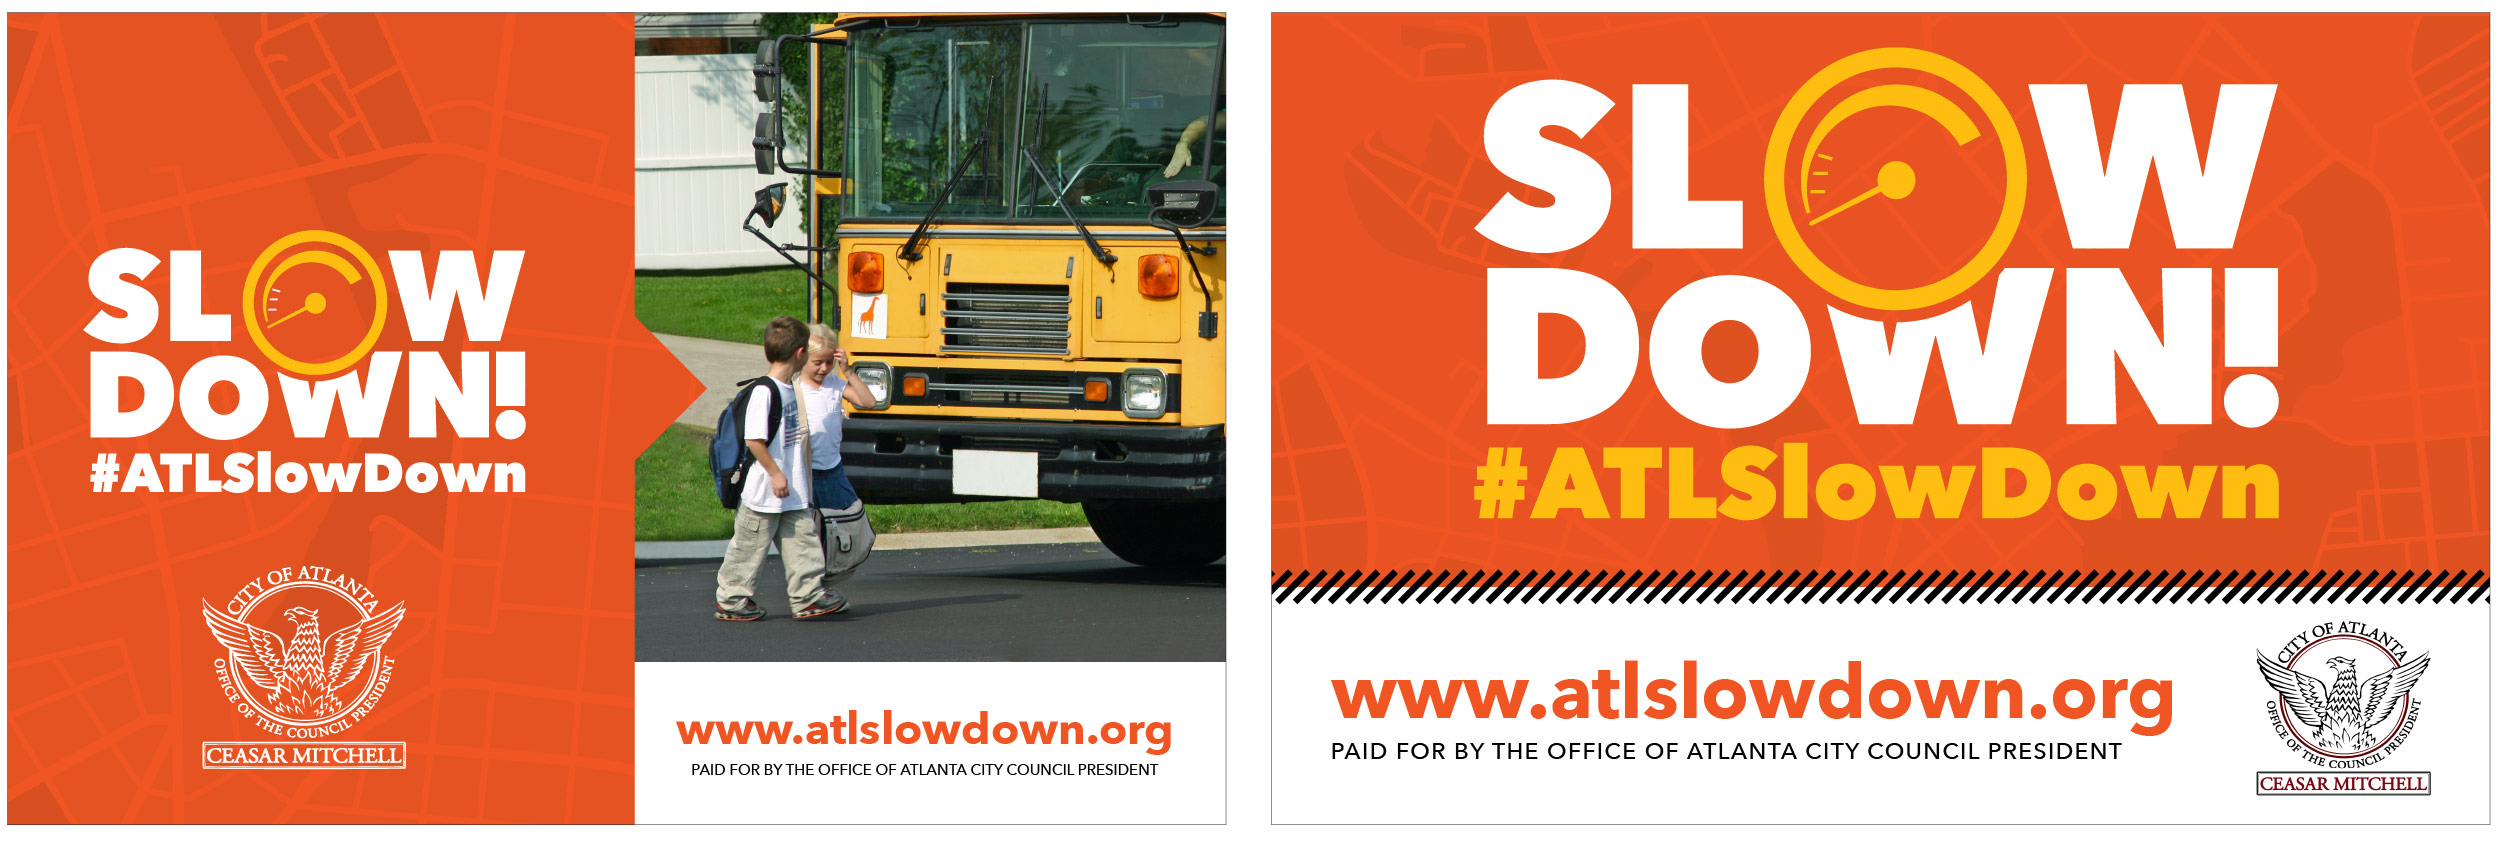 Signage designs for Slow Down ATL